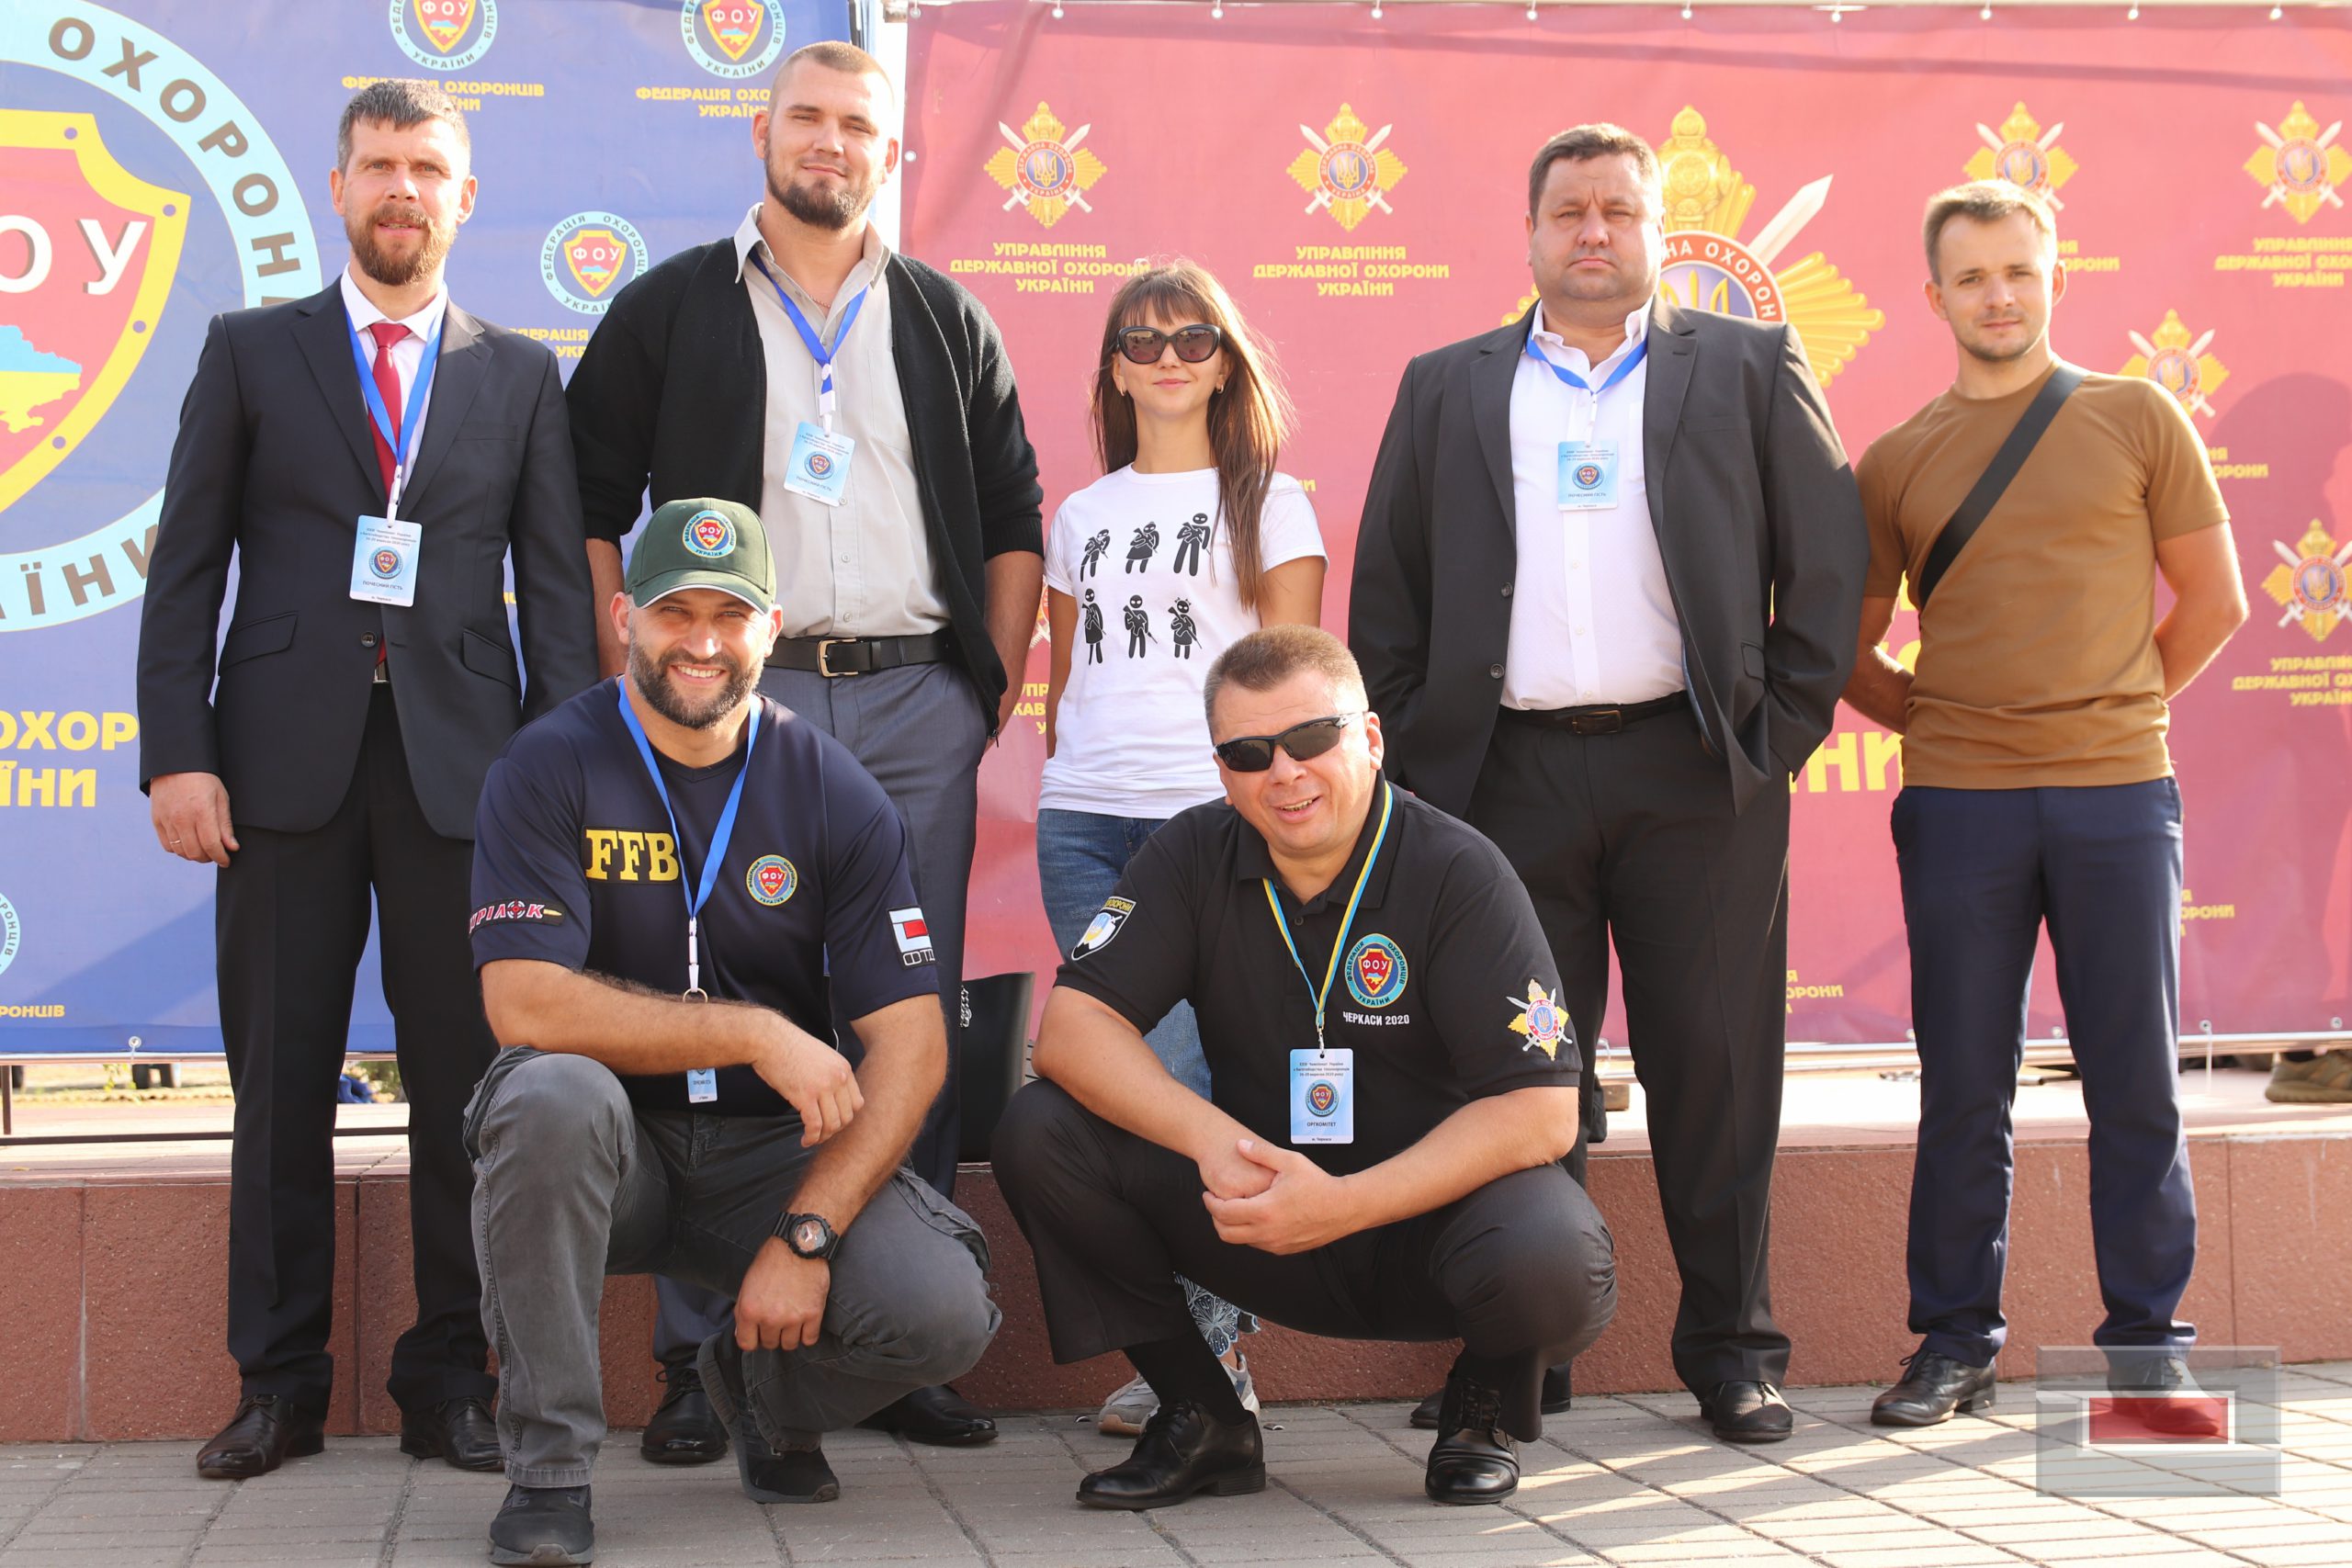 BFDR PARTICIPATED IN THE XXIII CHAMPIONSHIP OF UKRAINE BODYGUARDS